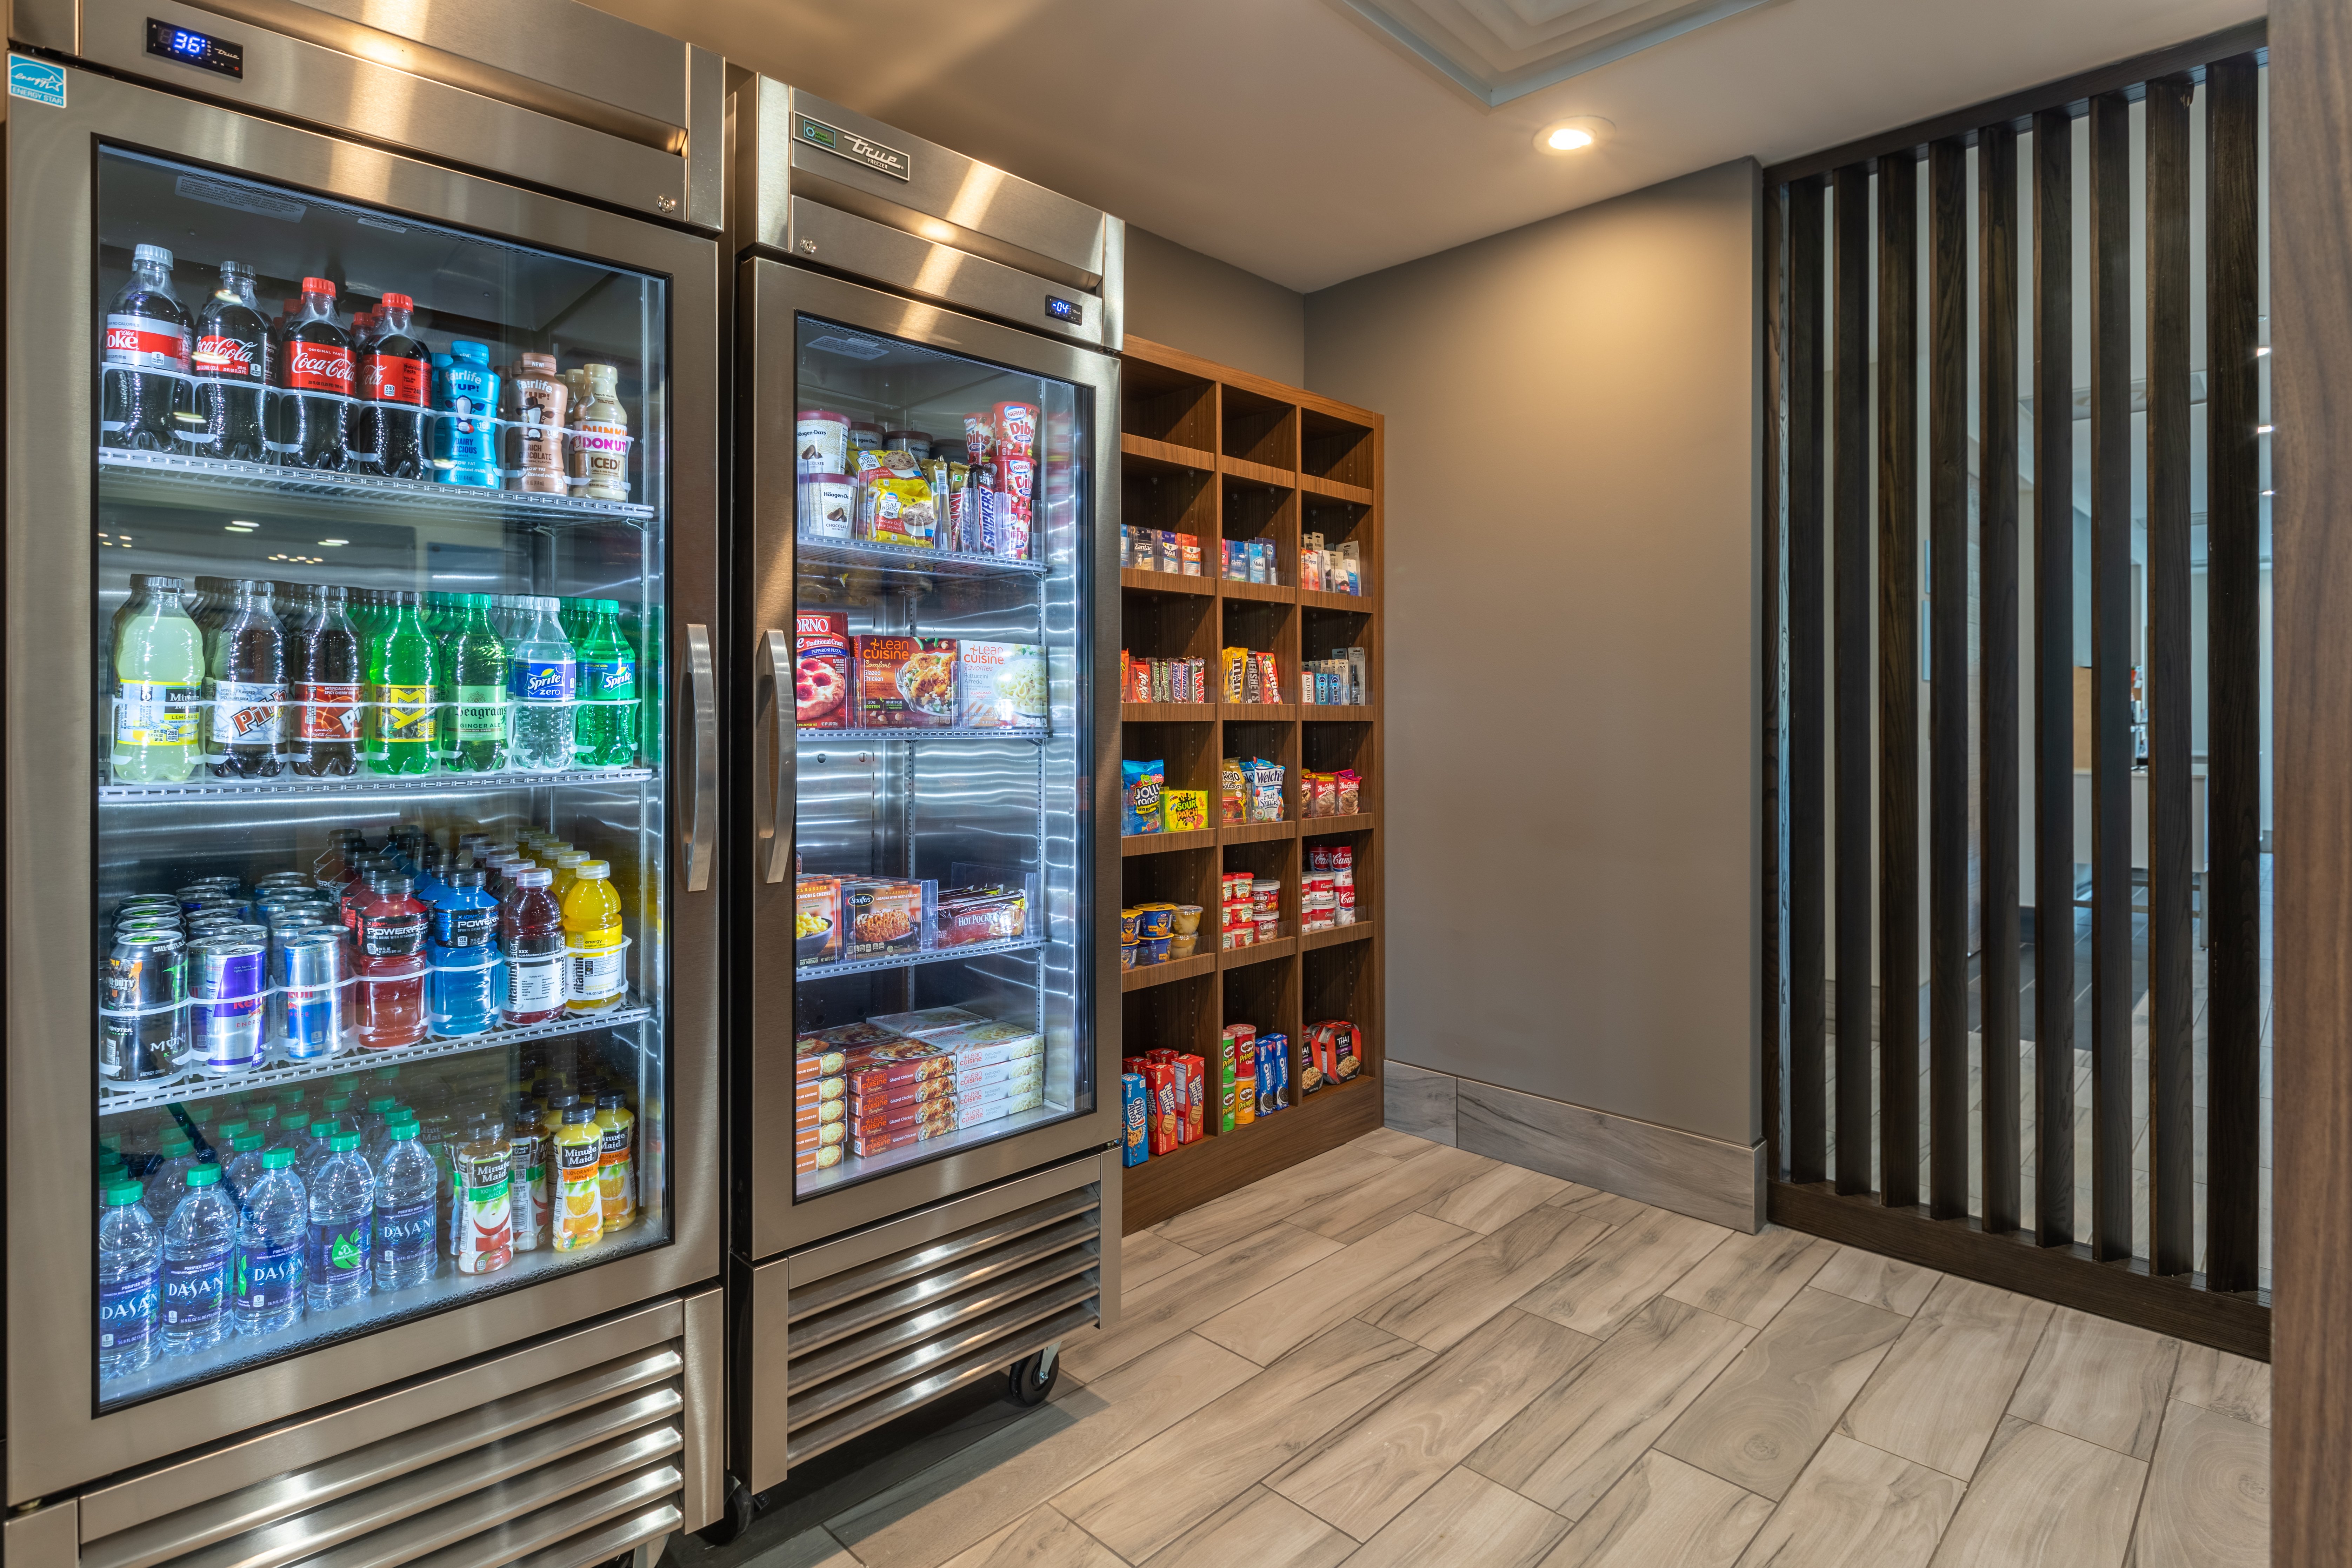 Enjoy or fully stocked pantry if you want to relax in your room